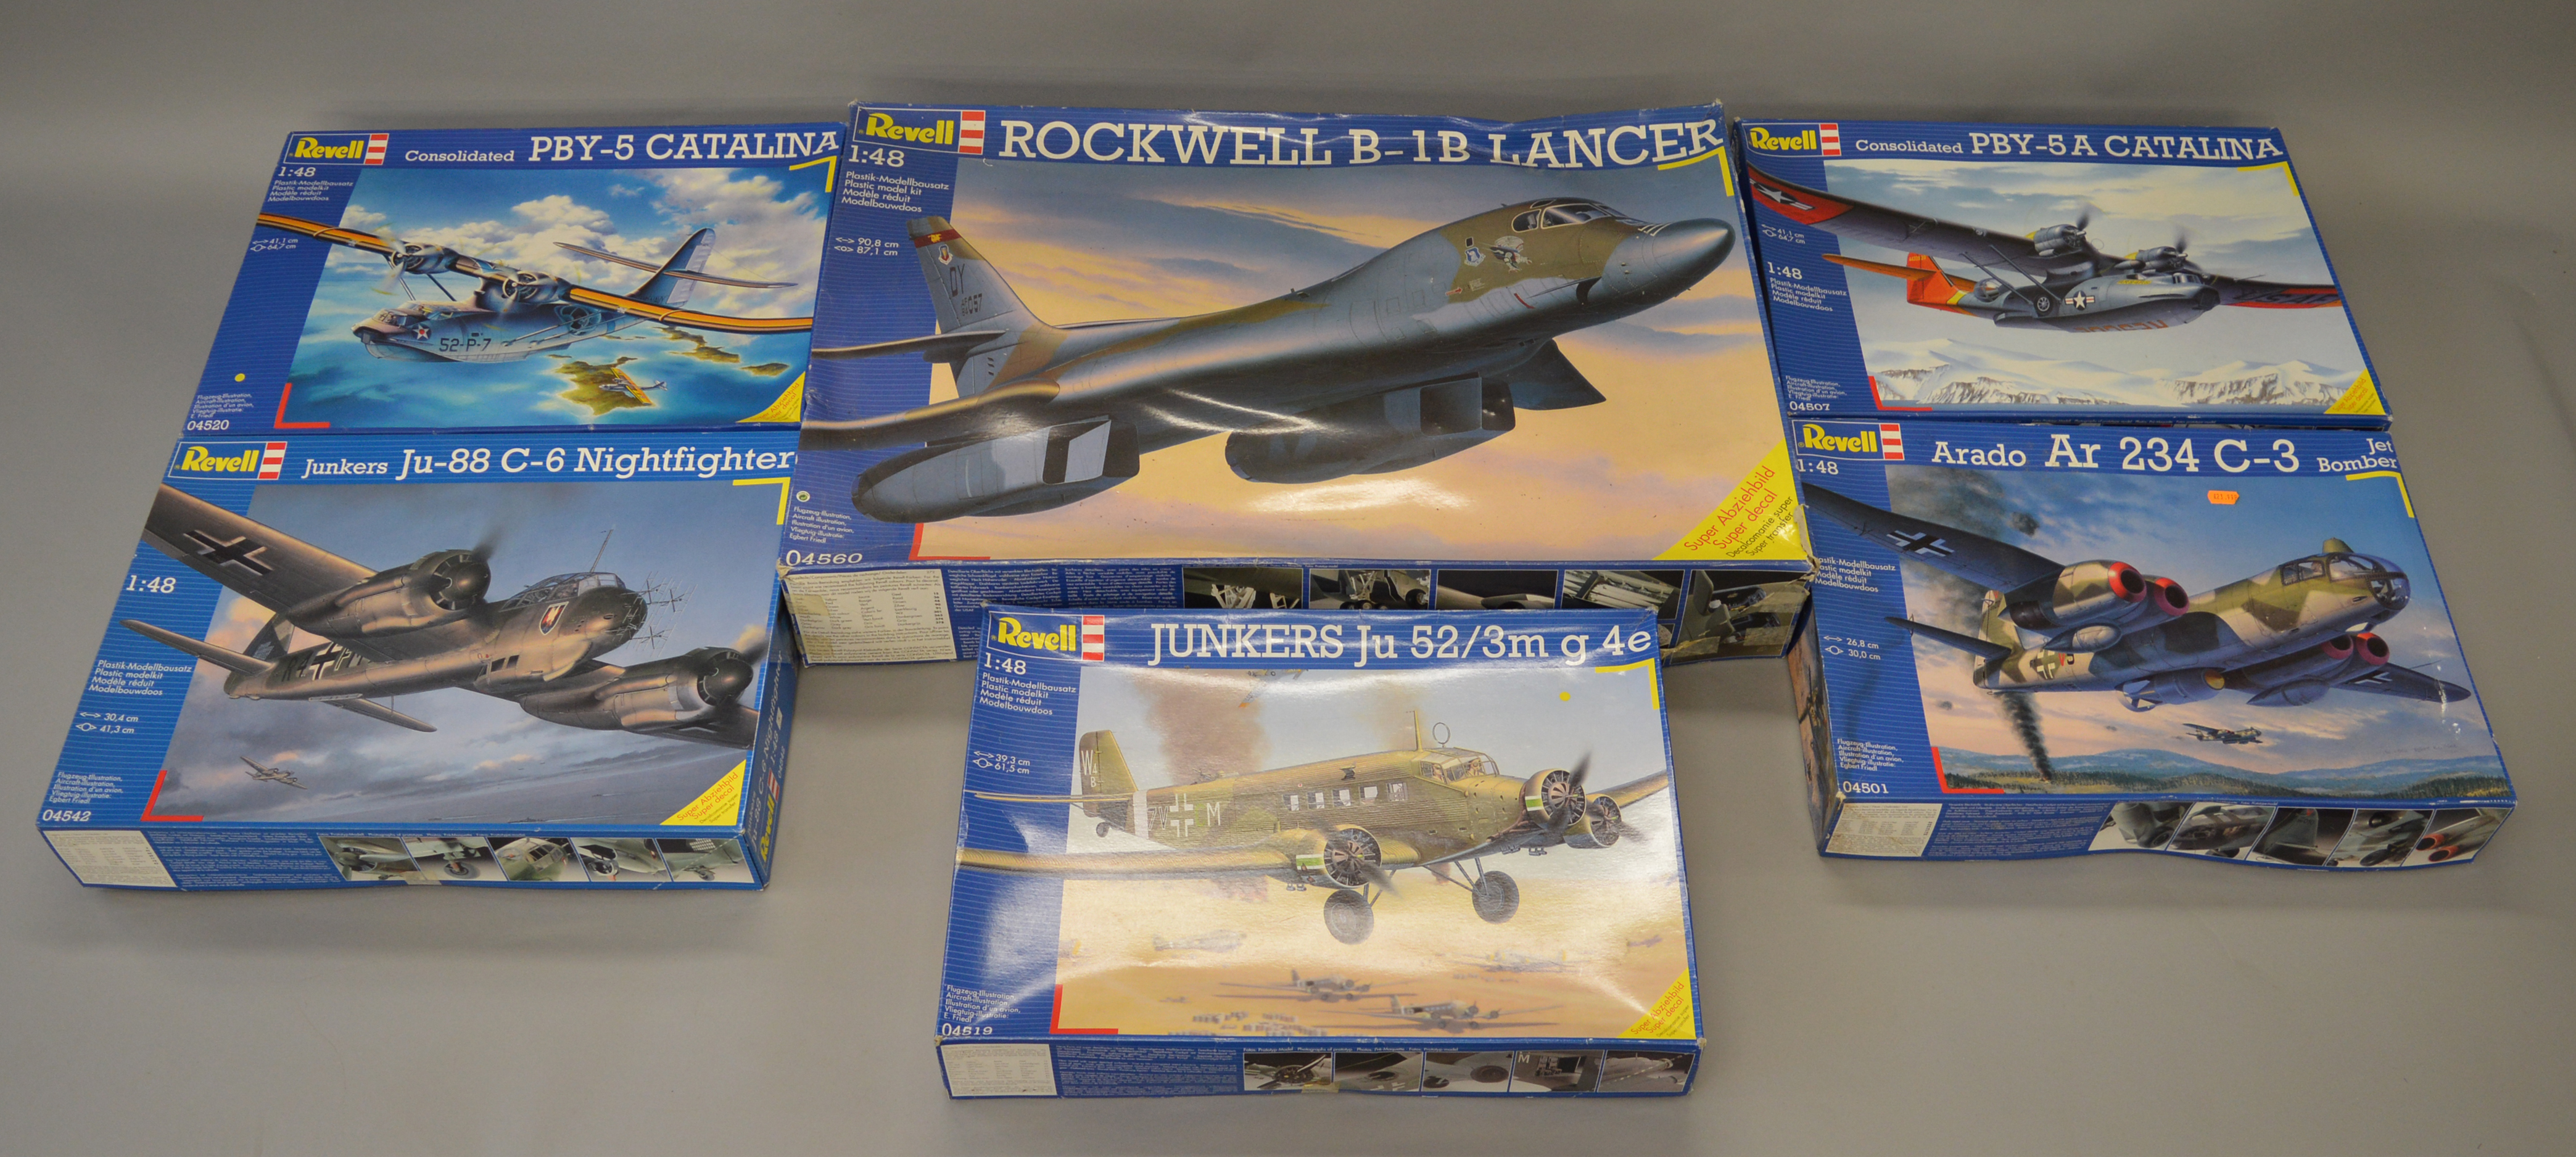 6 x Revell 1:48 scale model aircraft kits. Viewing recommended.